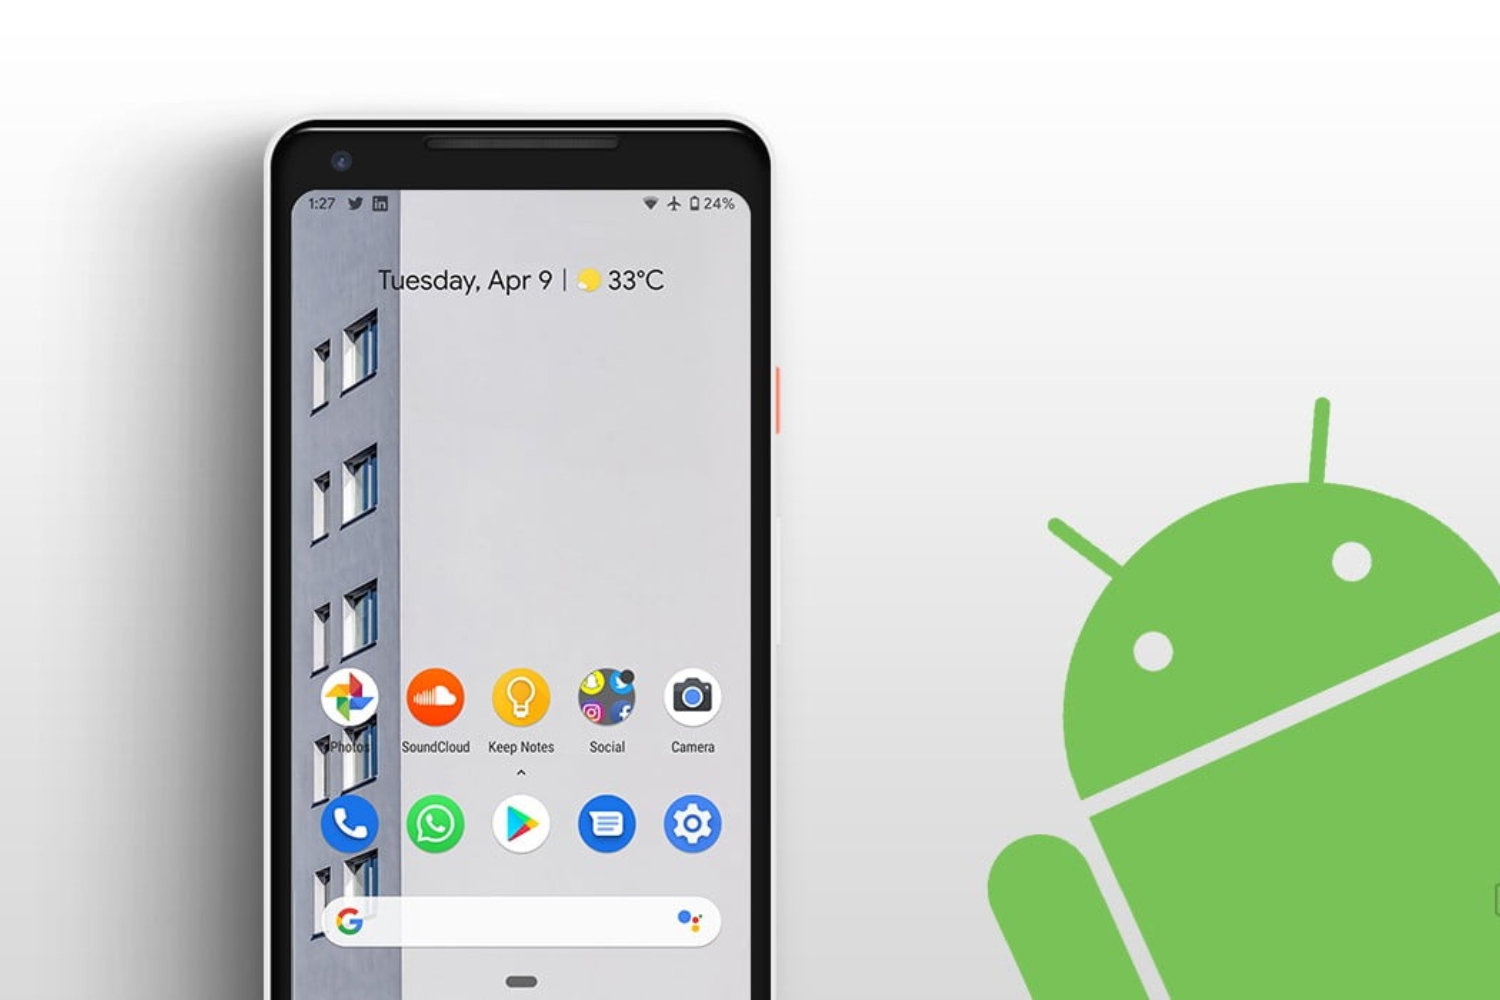 Xiaomi Launcher Change To Stock Android: Step-by-Step Guide